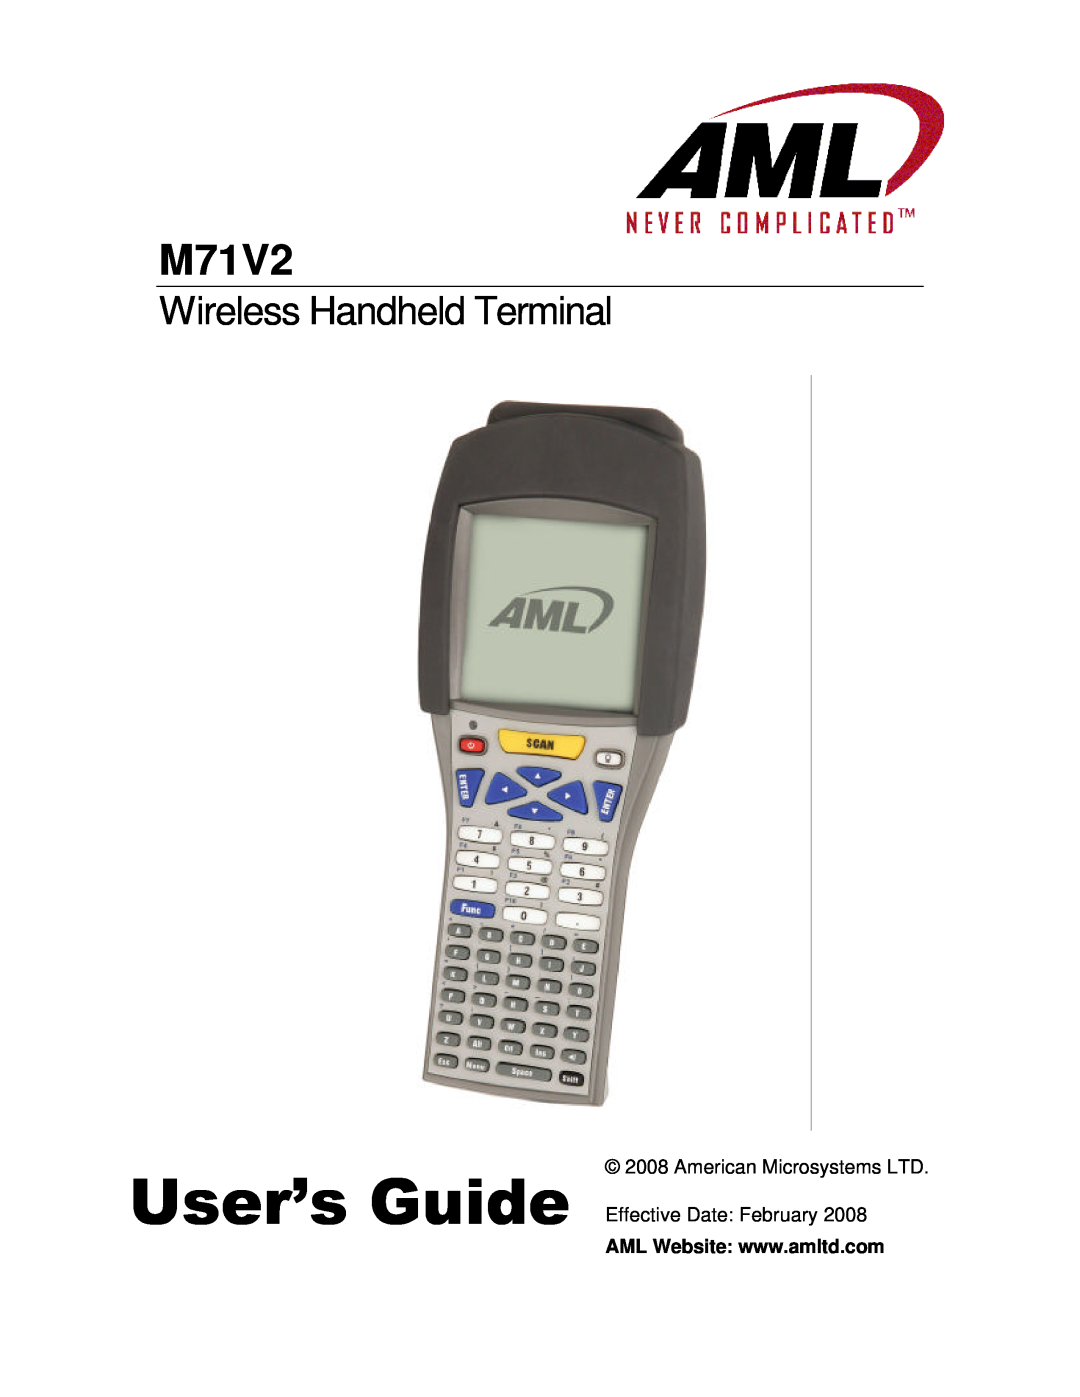 IBM M71V2 manual User’s Guide, Wireless Handheld Terminal, Effective Date February 